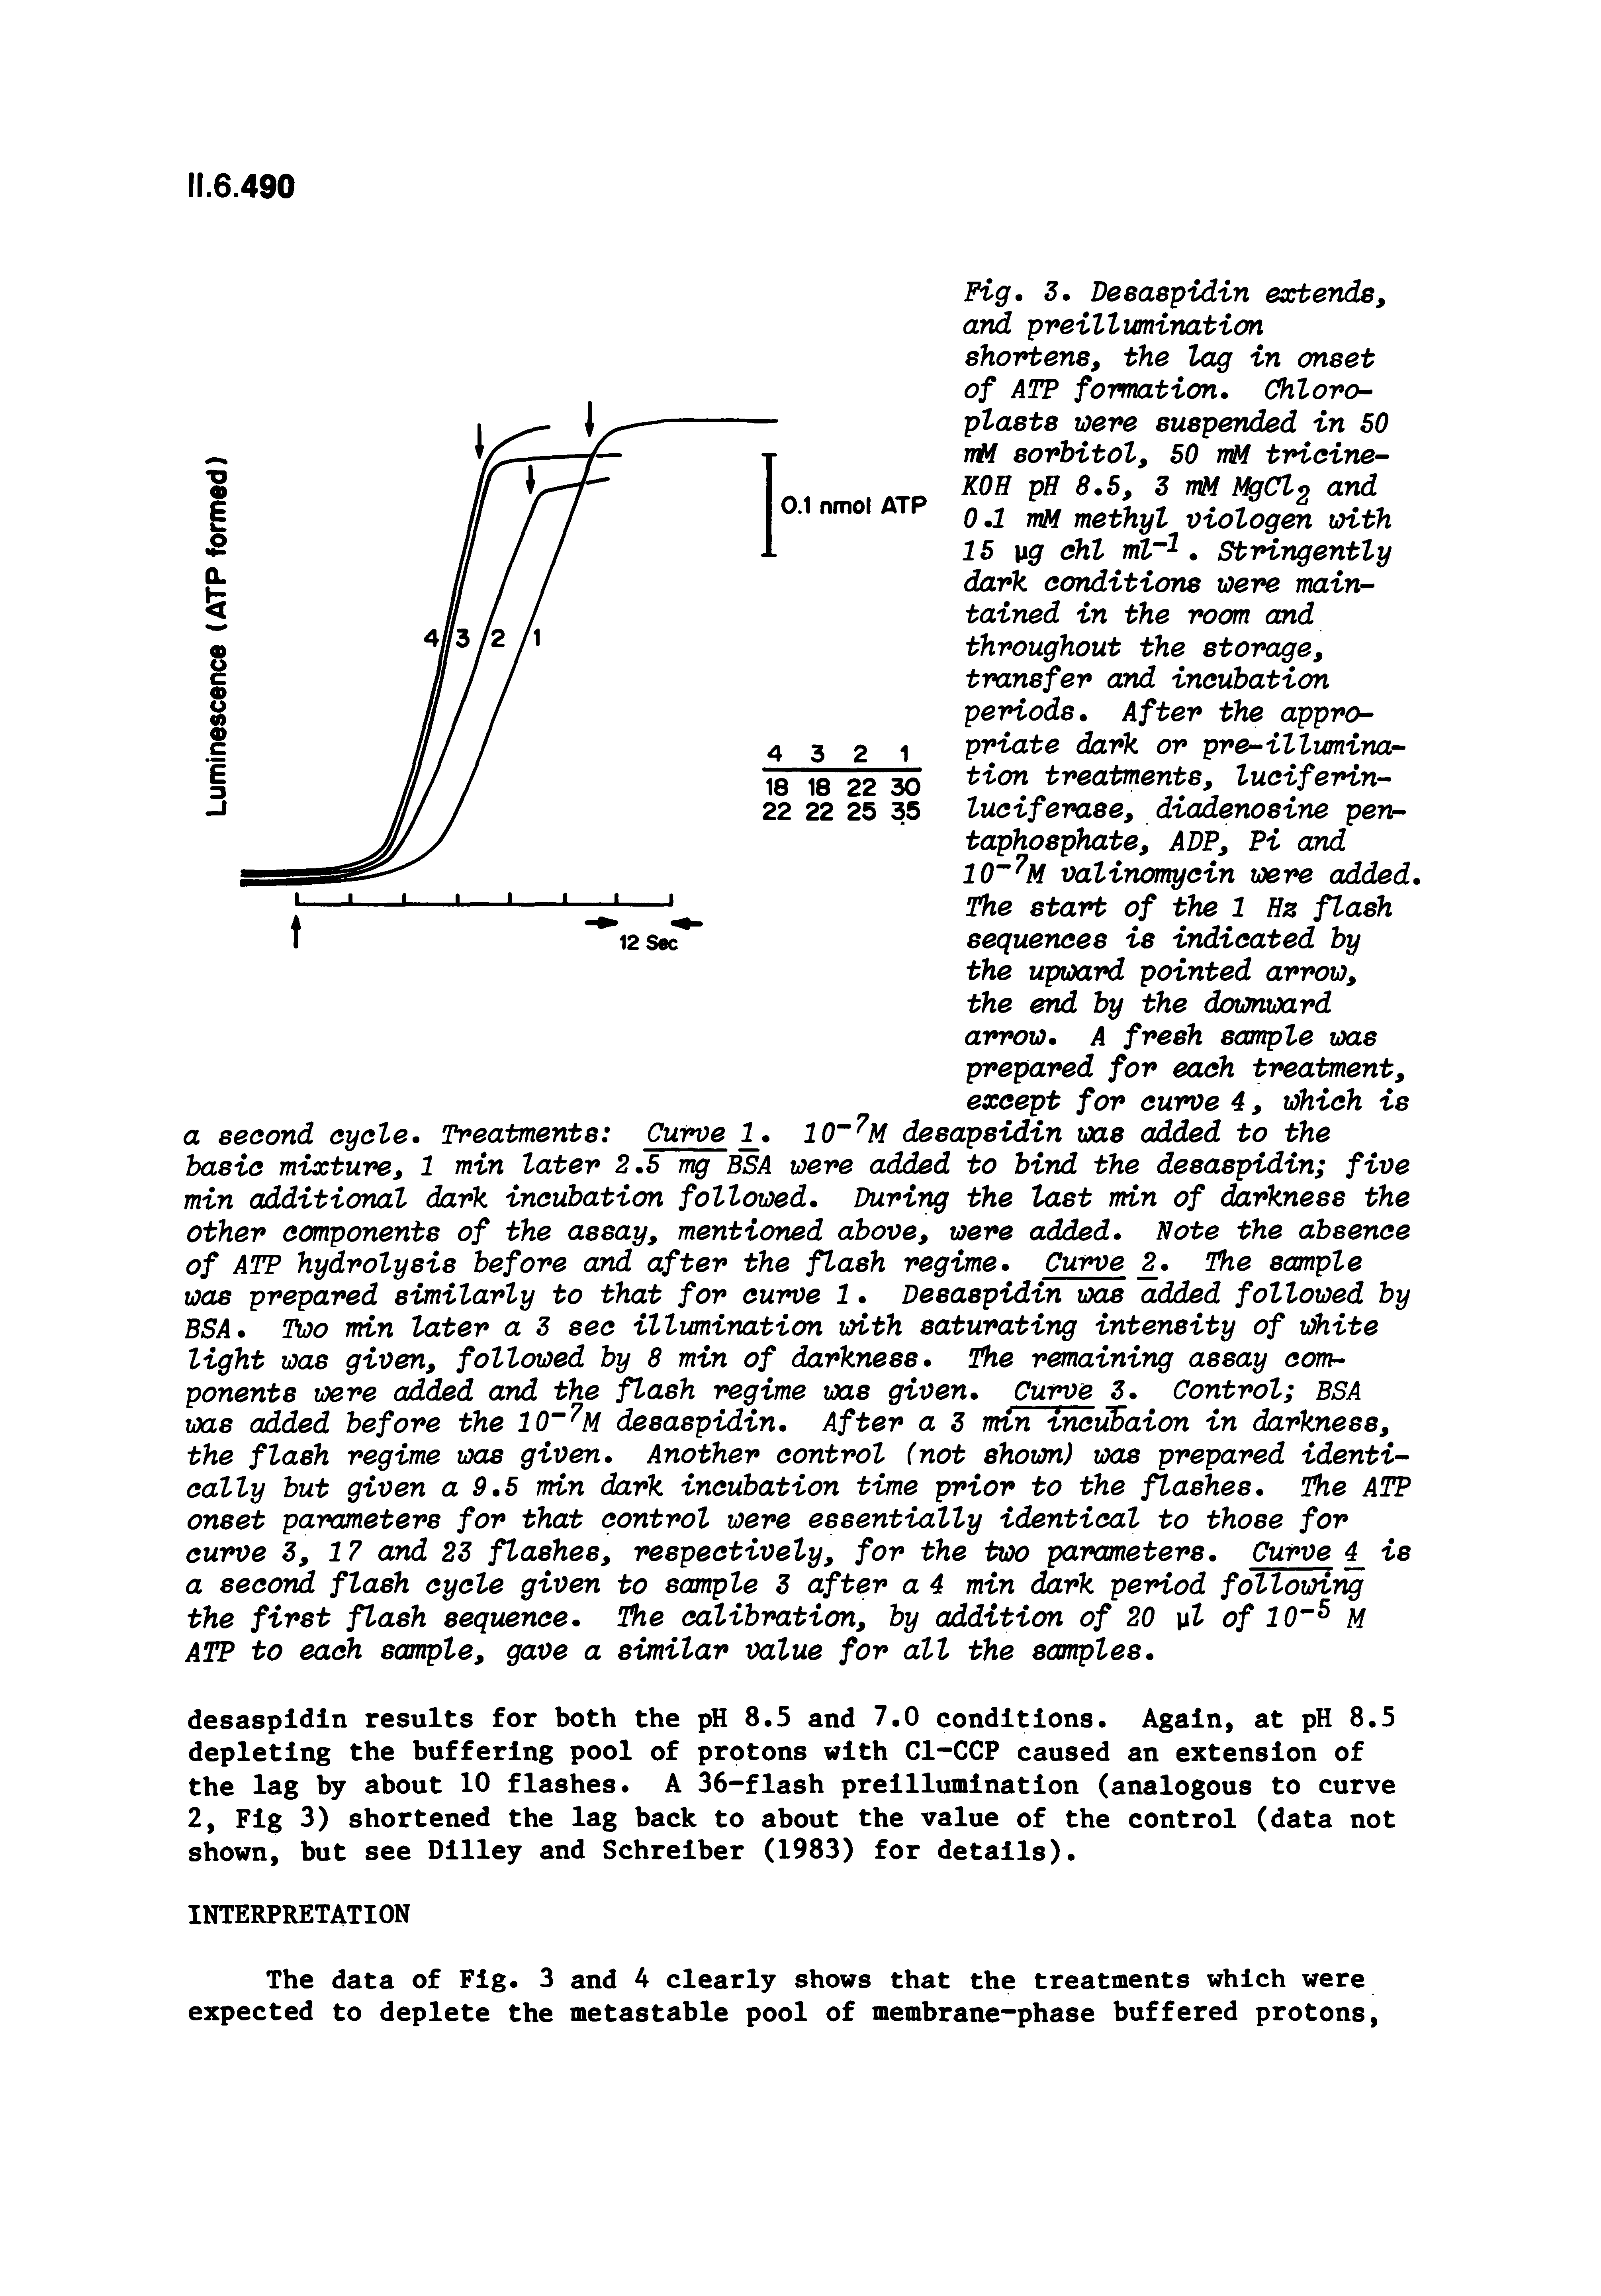 Fig. 3. Deeaspidin extends, and pveillumination shortens, the lag in onset of ATP formation. Chloro--plasts were suspended in SO irM sorbitol, SO wM trioine-KOH pH 8.S, 3 mM MgCl2 and 0.1 wM methyl viologen with IS g chi nil ". Stringently dark conditions were main tained in the room and throughout the storage, transfer and incubation periods. After the appro--priate dark or pre-illumination treatments, luciferin-luciferase, diddenosine pen-taphosphate, ADP, Pi and lO M valinomycin were added. The start of the 1 Hz flash sequences is indicated by the upward pointed arrow, the end by the downward arrow. A fresh sample was prepared for each treatment, except for curve 4, which is...